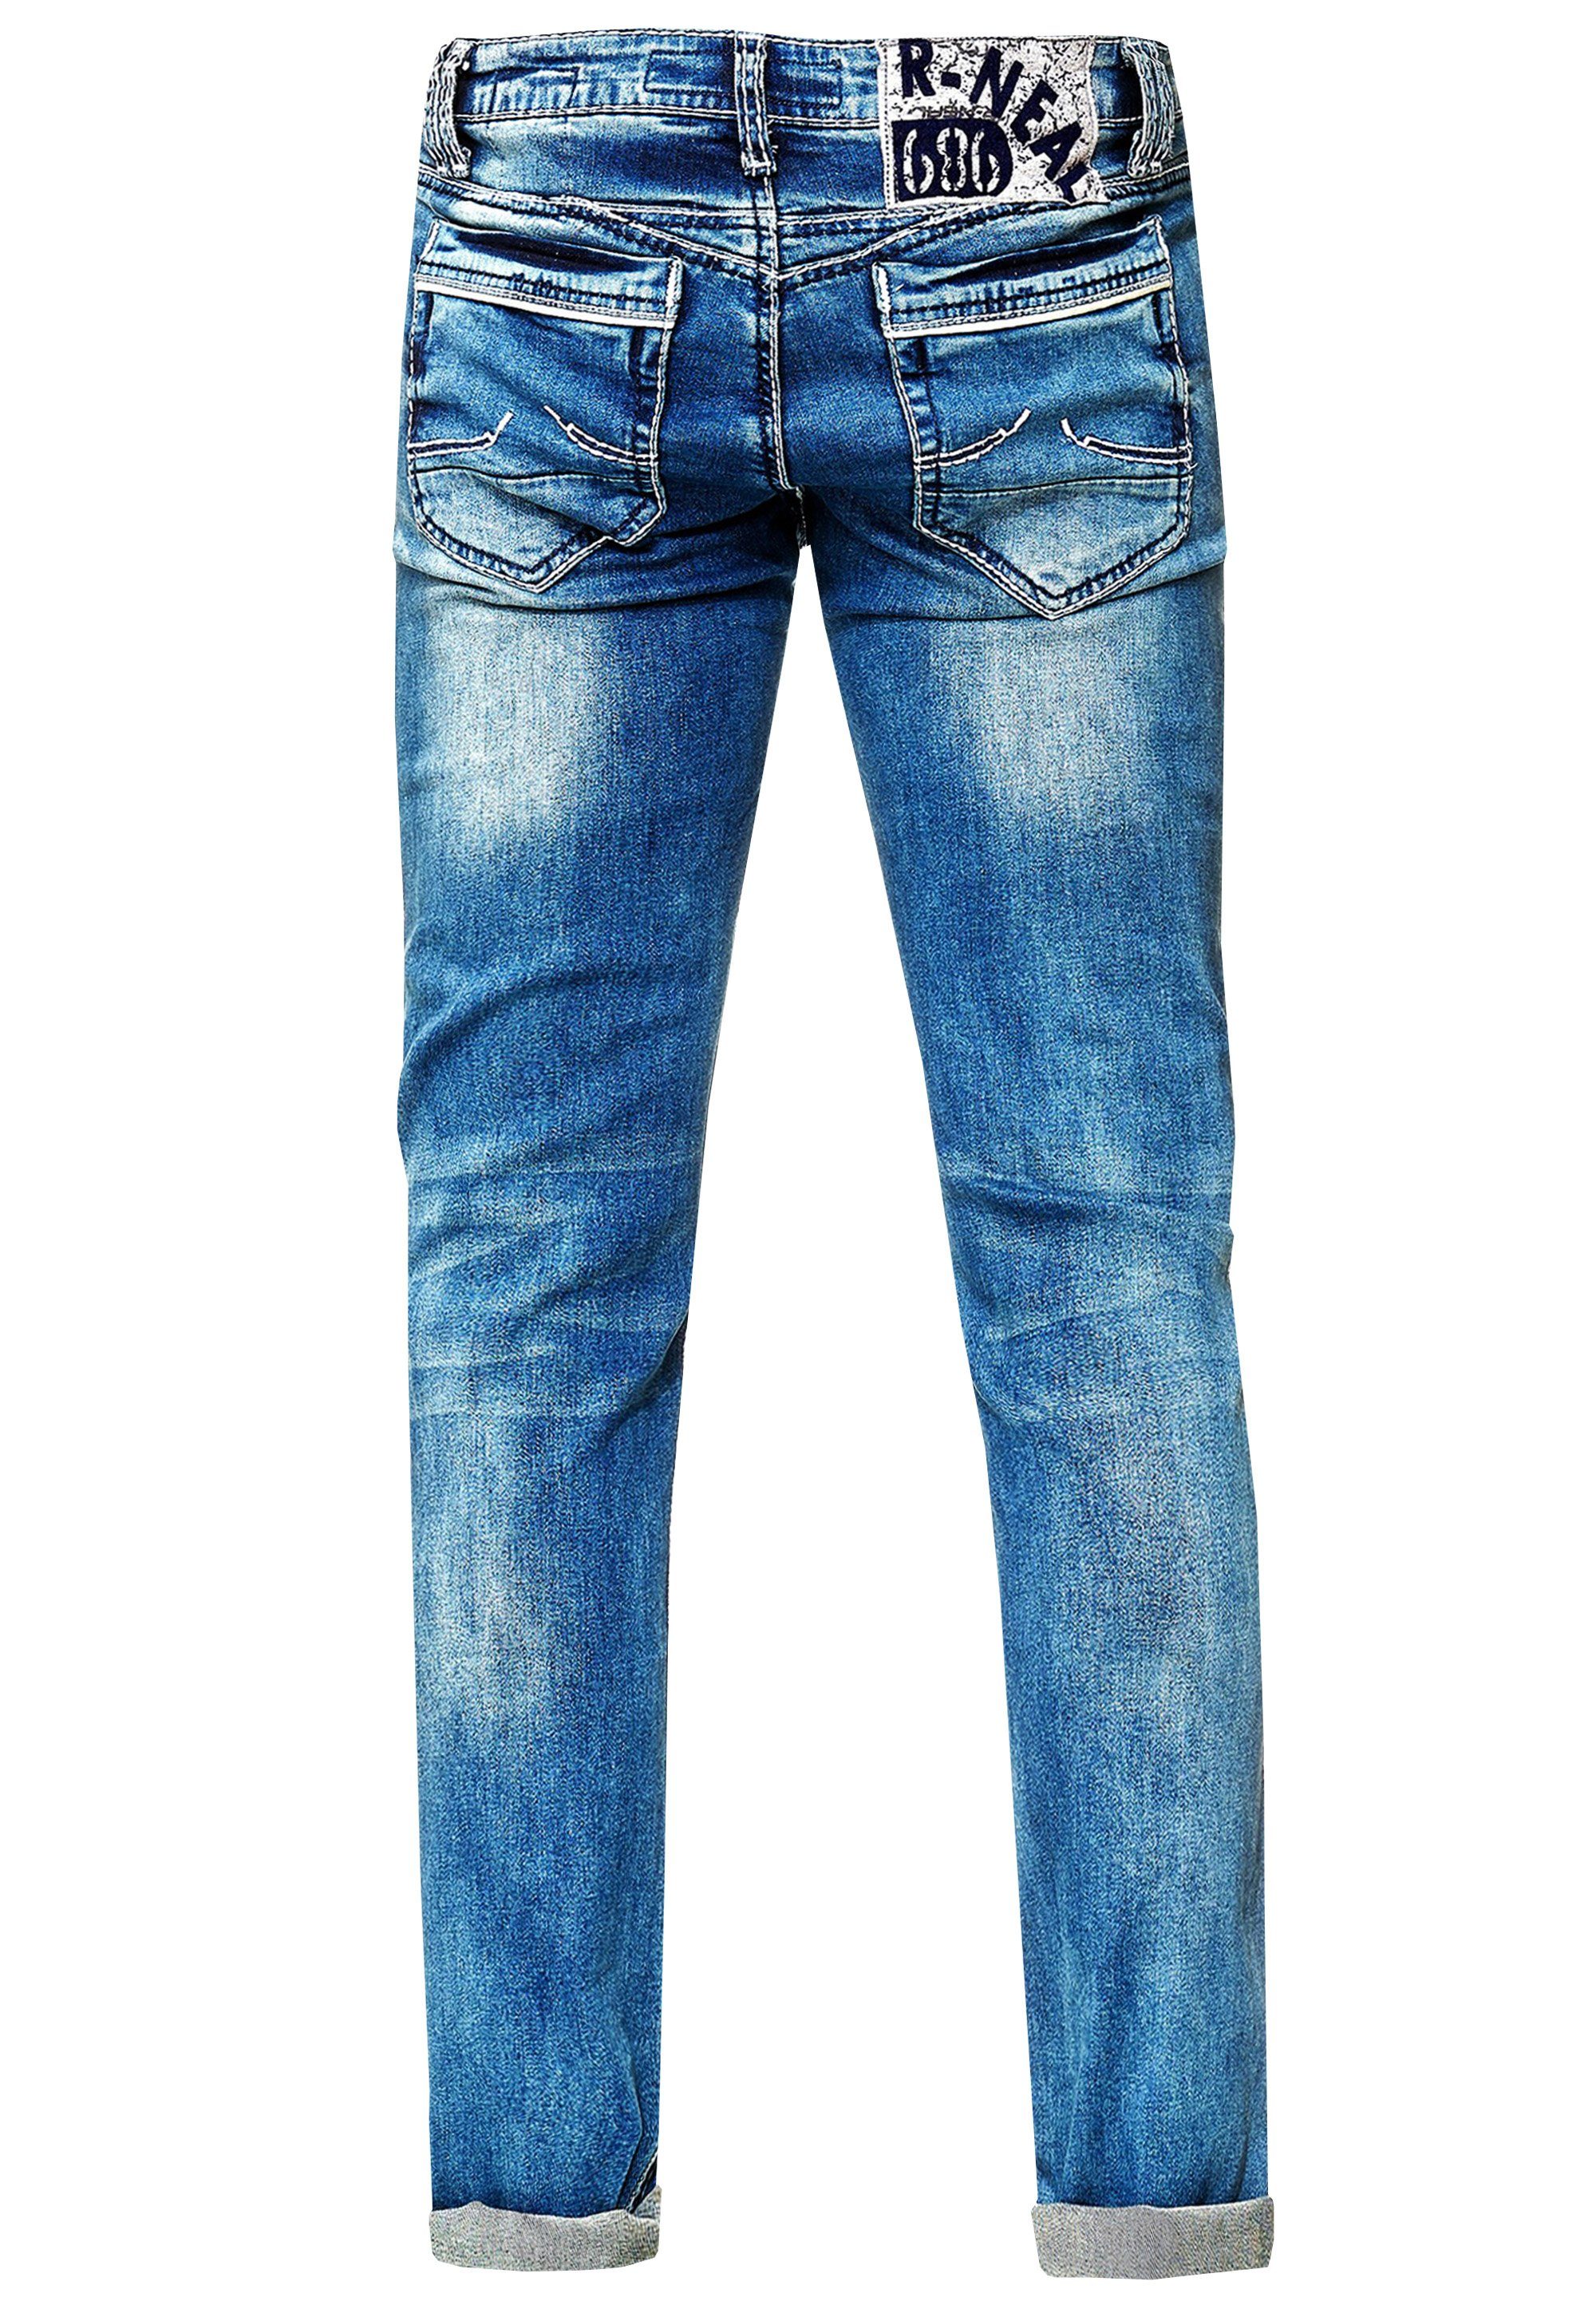 Rusty Neal Straight-Jeans NEW YORK im modernen Used-Look 29